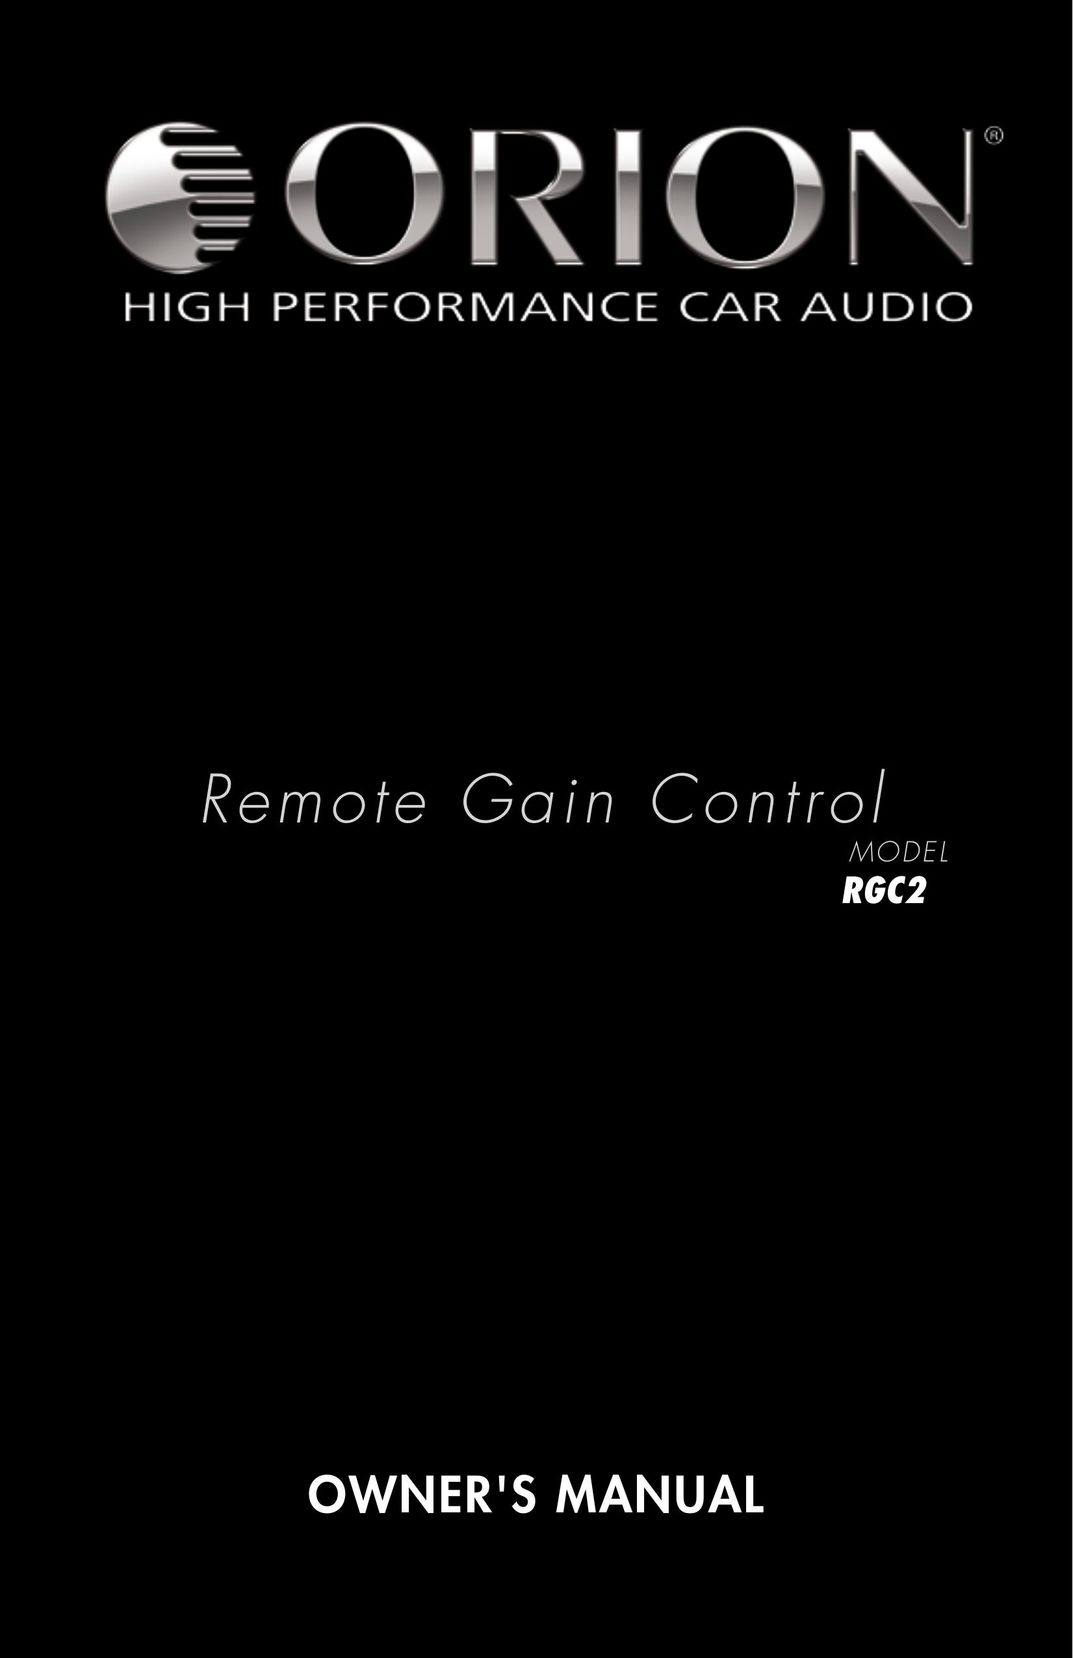 Orion Car Audio RGC2 Car Stereo System User Manual